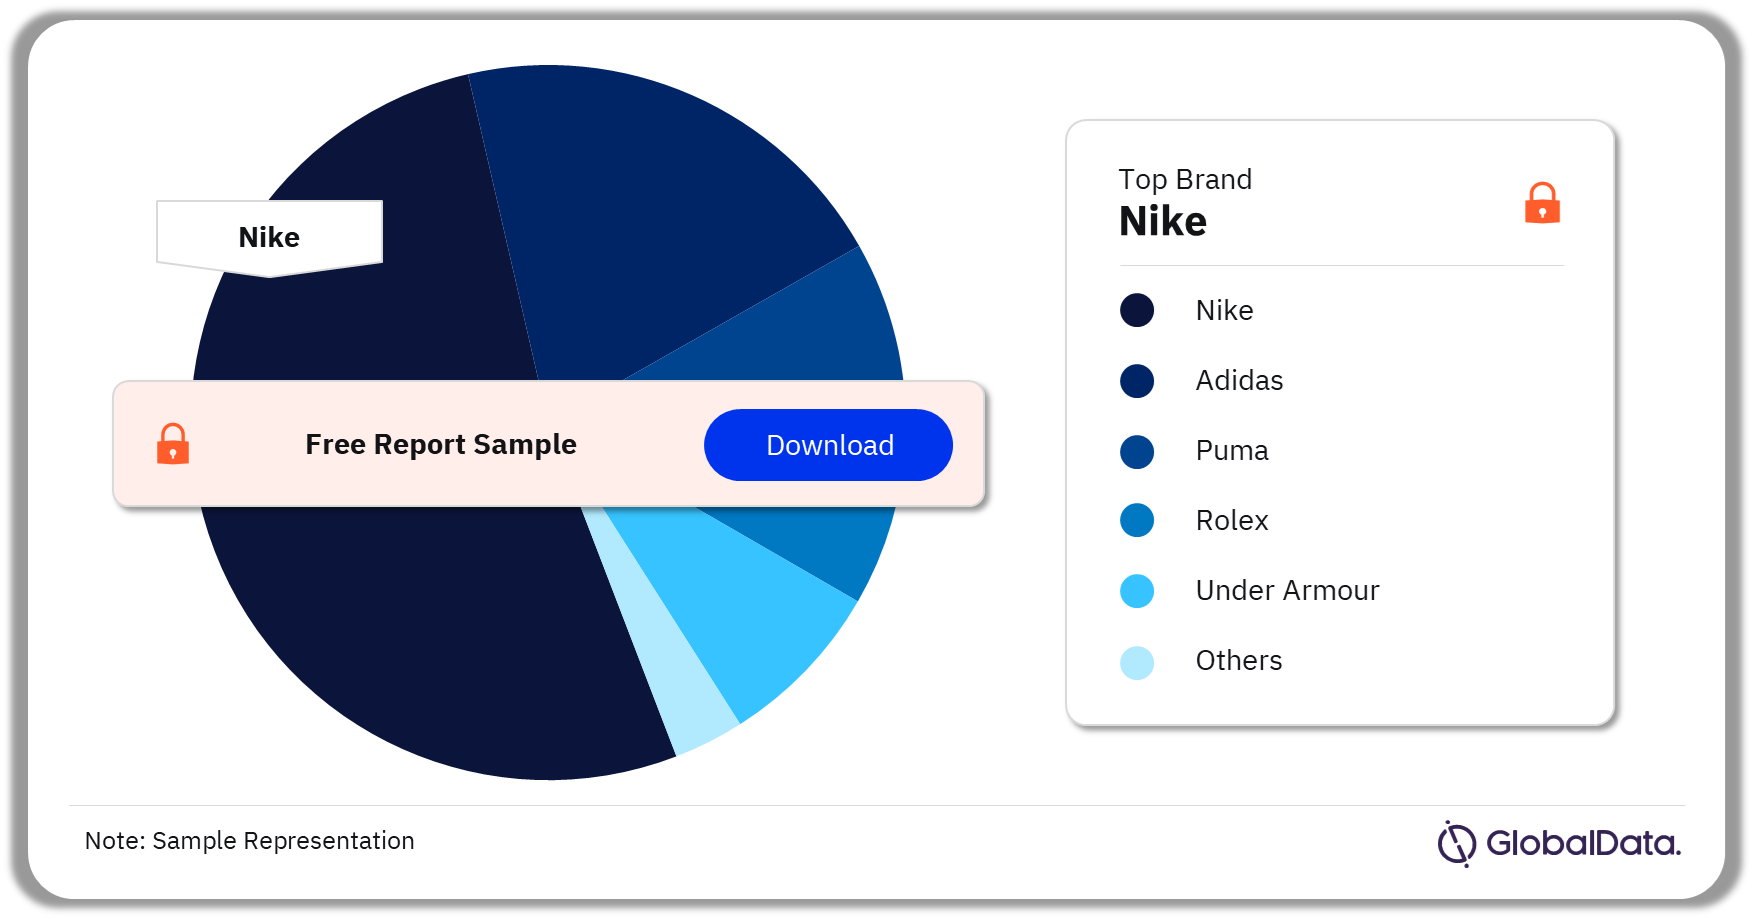 Apparel, Clothing, and Accessories Sports Sponsorship Market Analysis by Active Brands, 2023 (%)